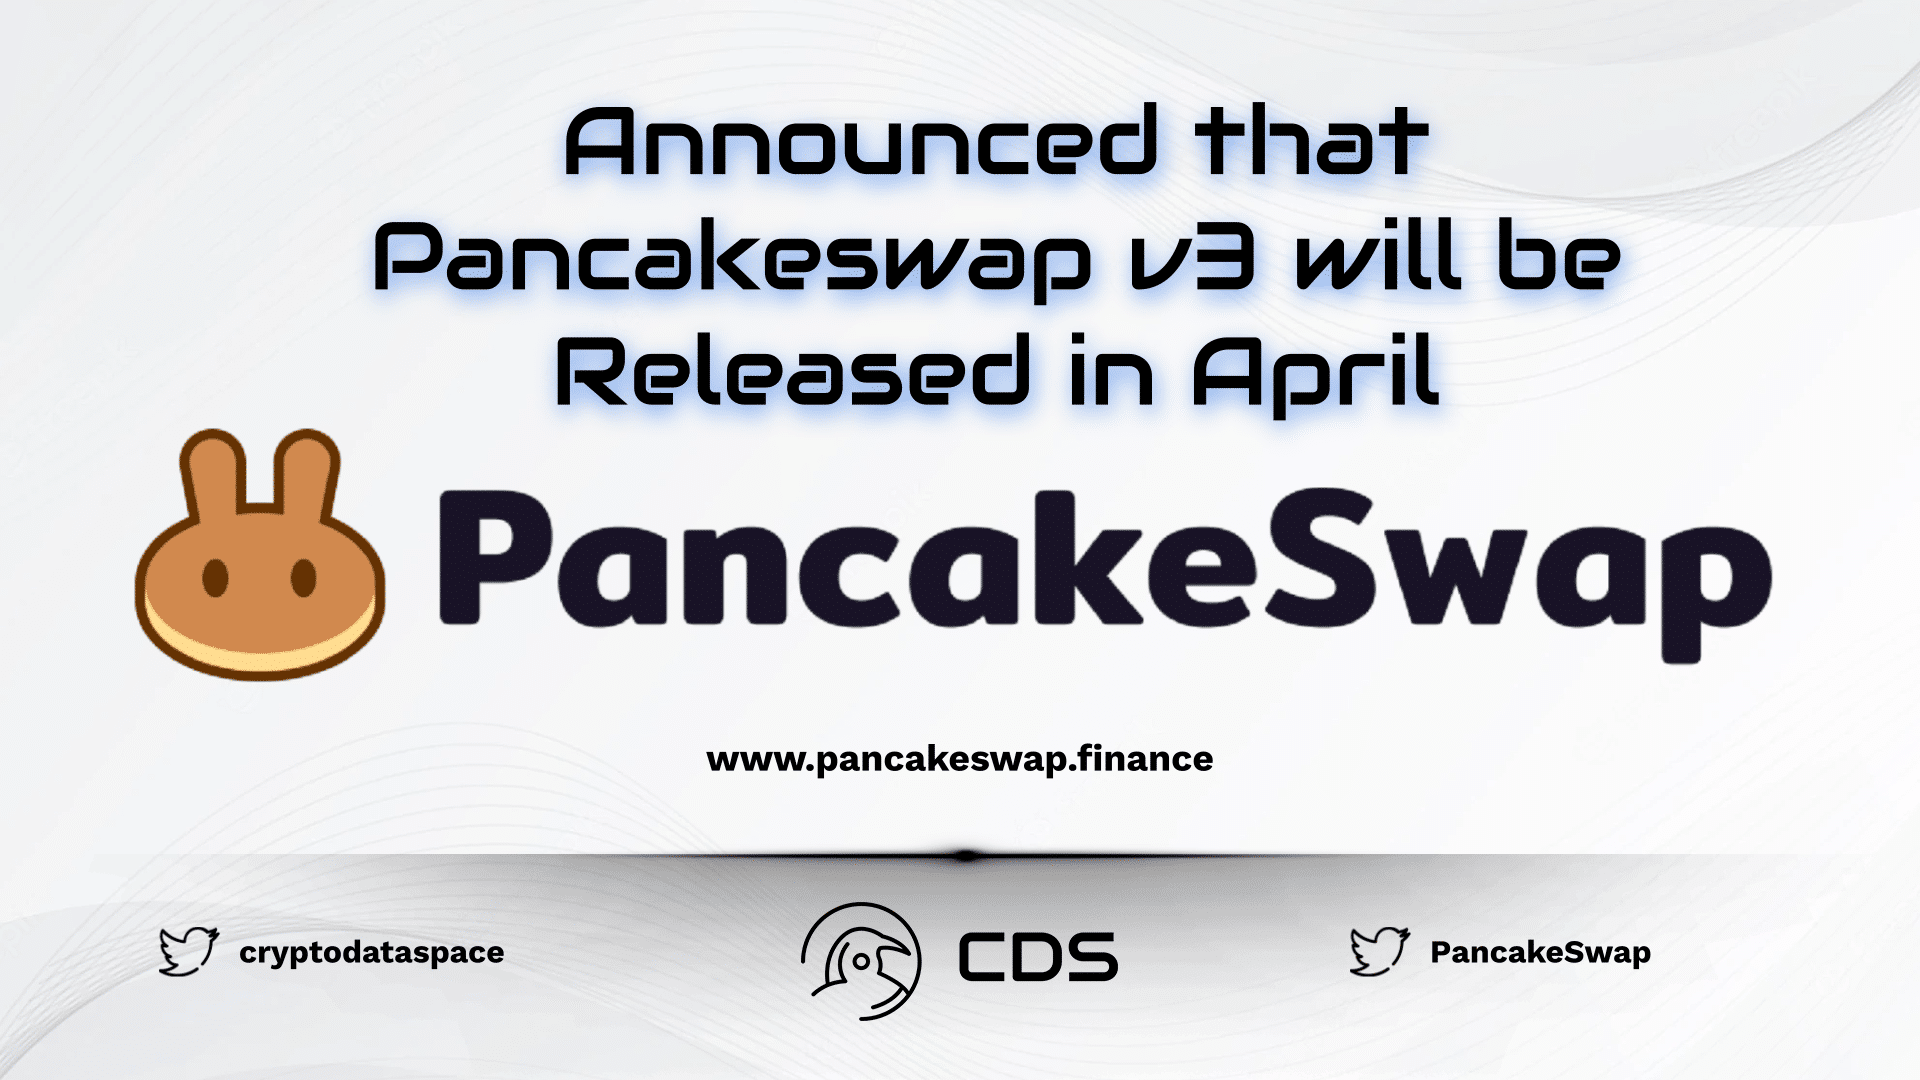 Announced that Pancakeswap v3 will be Released in April